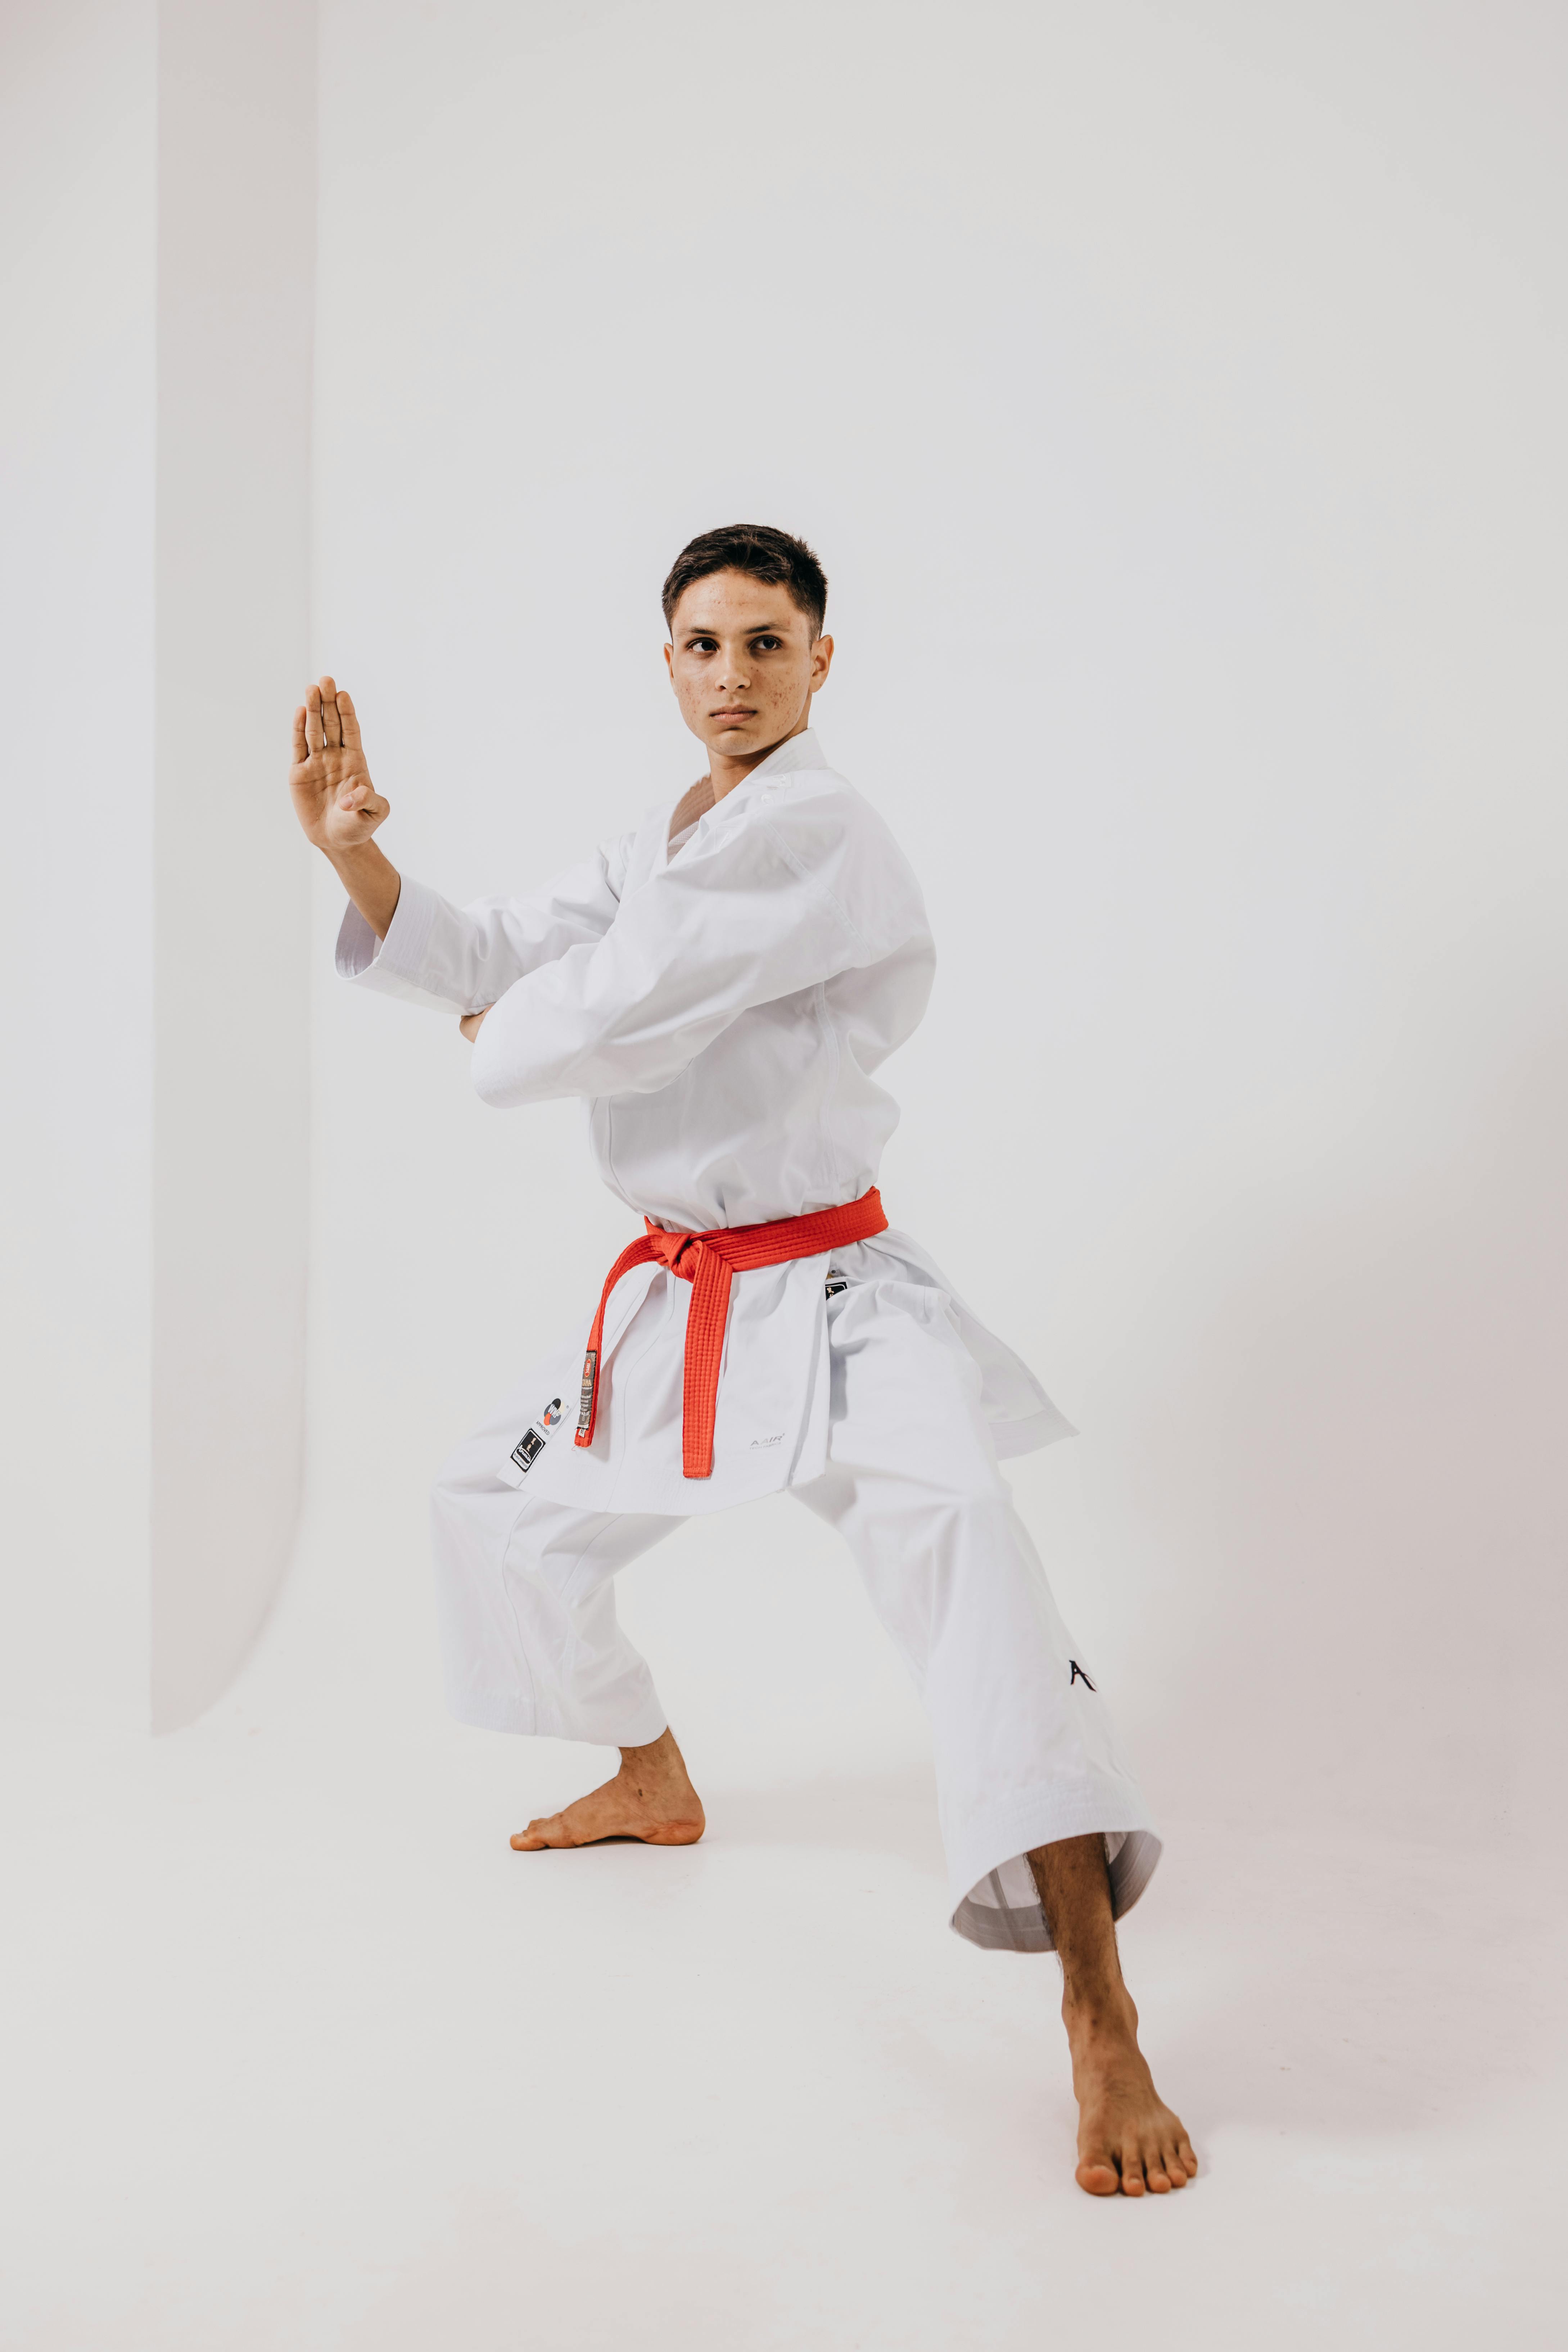 What Is the Best Type of Martial Art for You?